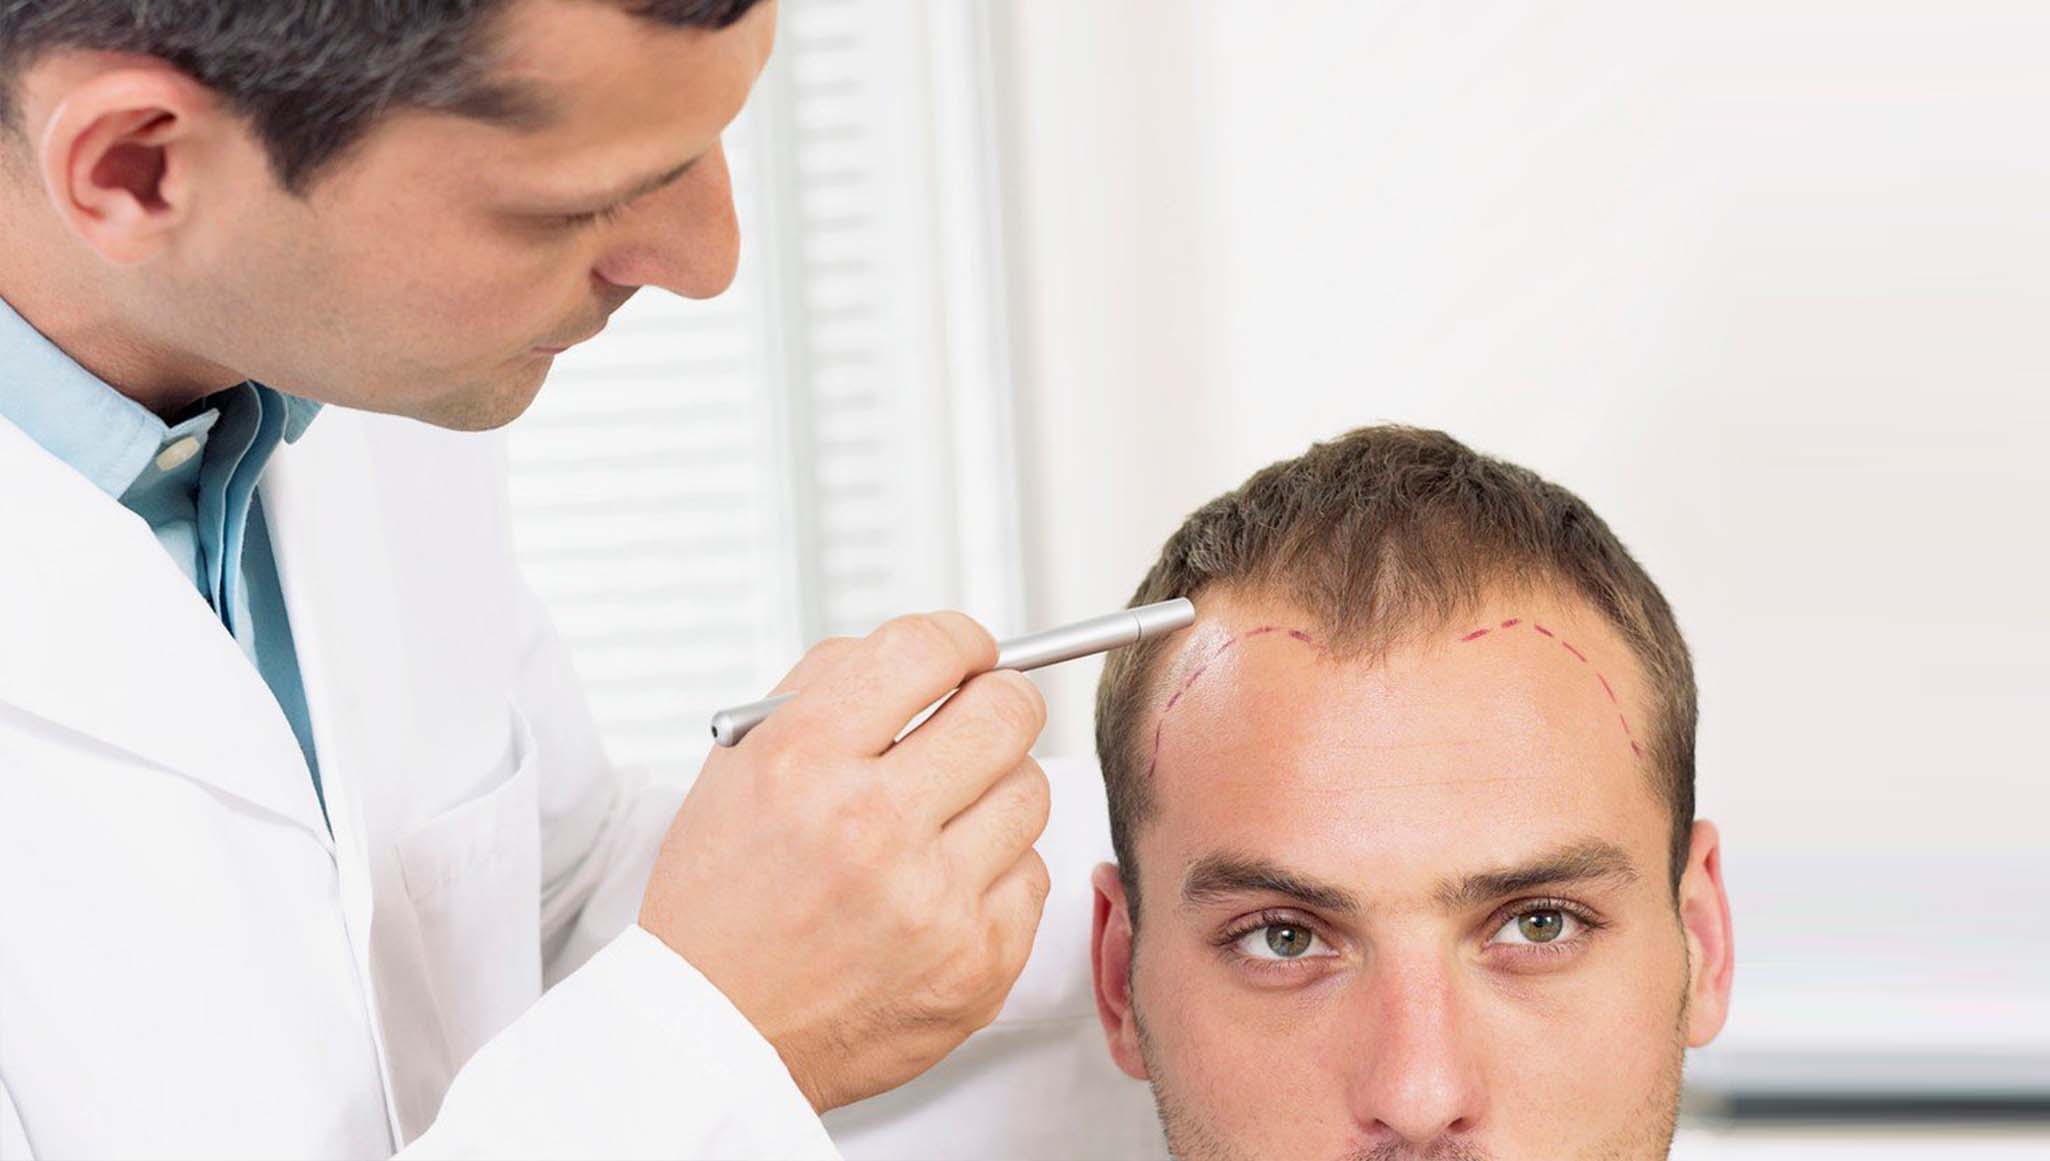 WHAT ARE THE PROS AND CONS OF HAIR TRANSPLANTS?